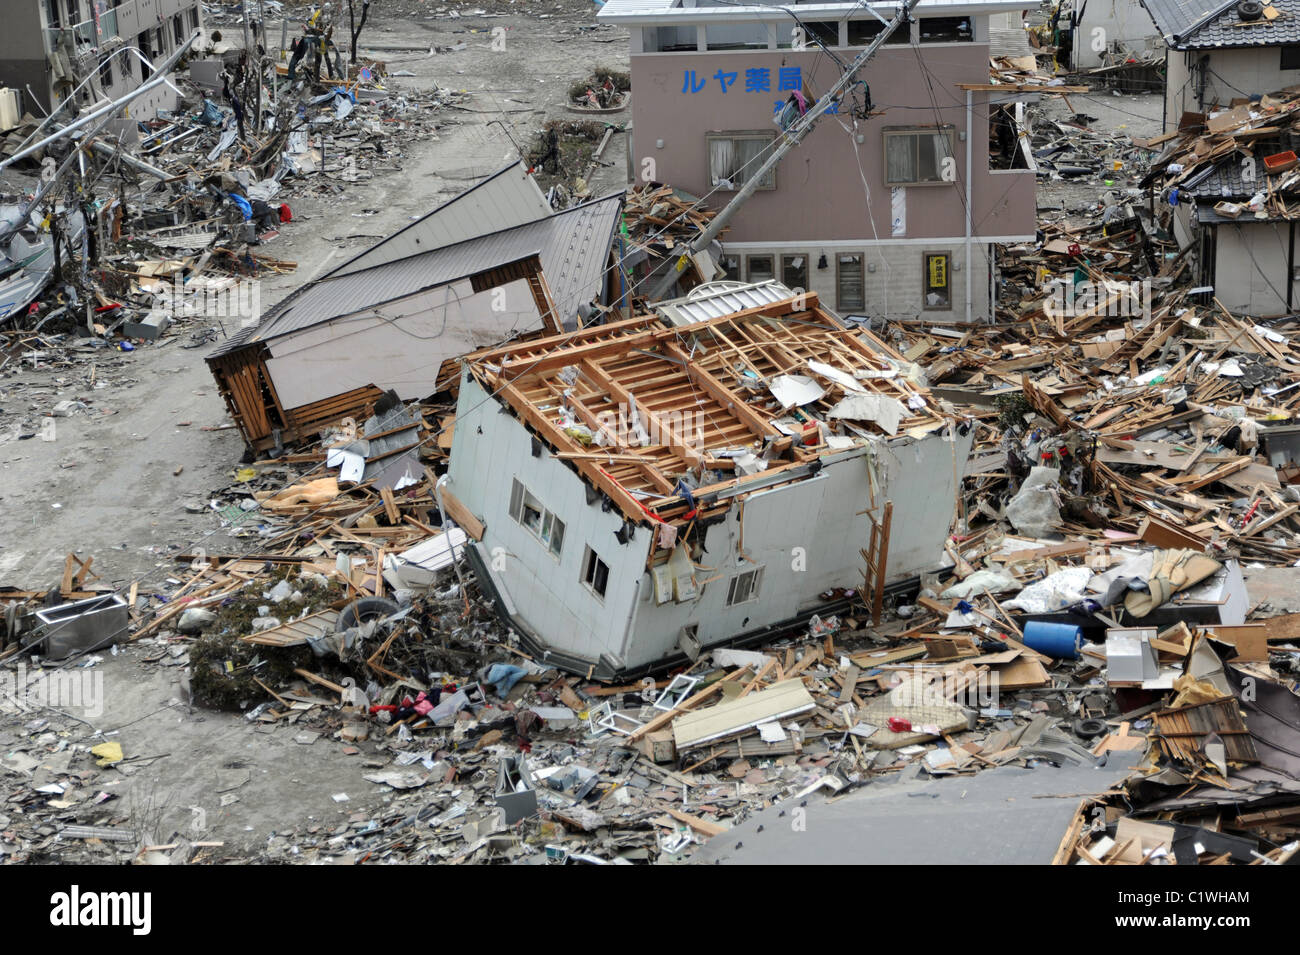 A house lies upside down on its roof among debris in Ofunato, Japan, following the March 2011 earthquake + tsunami. Stock Photo